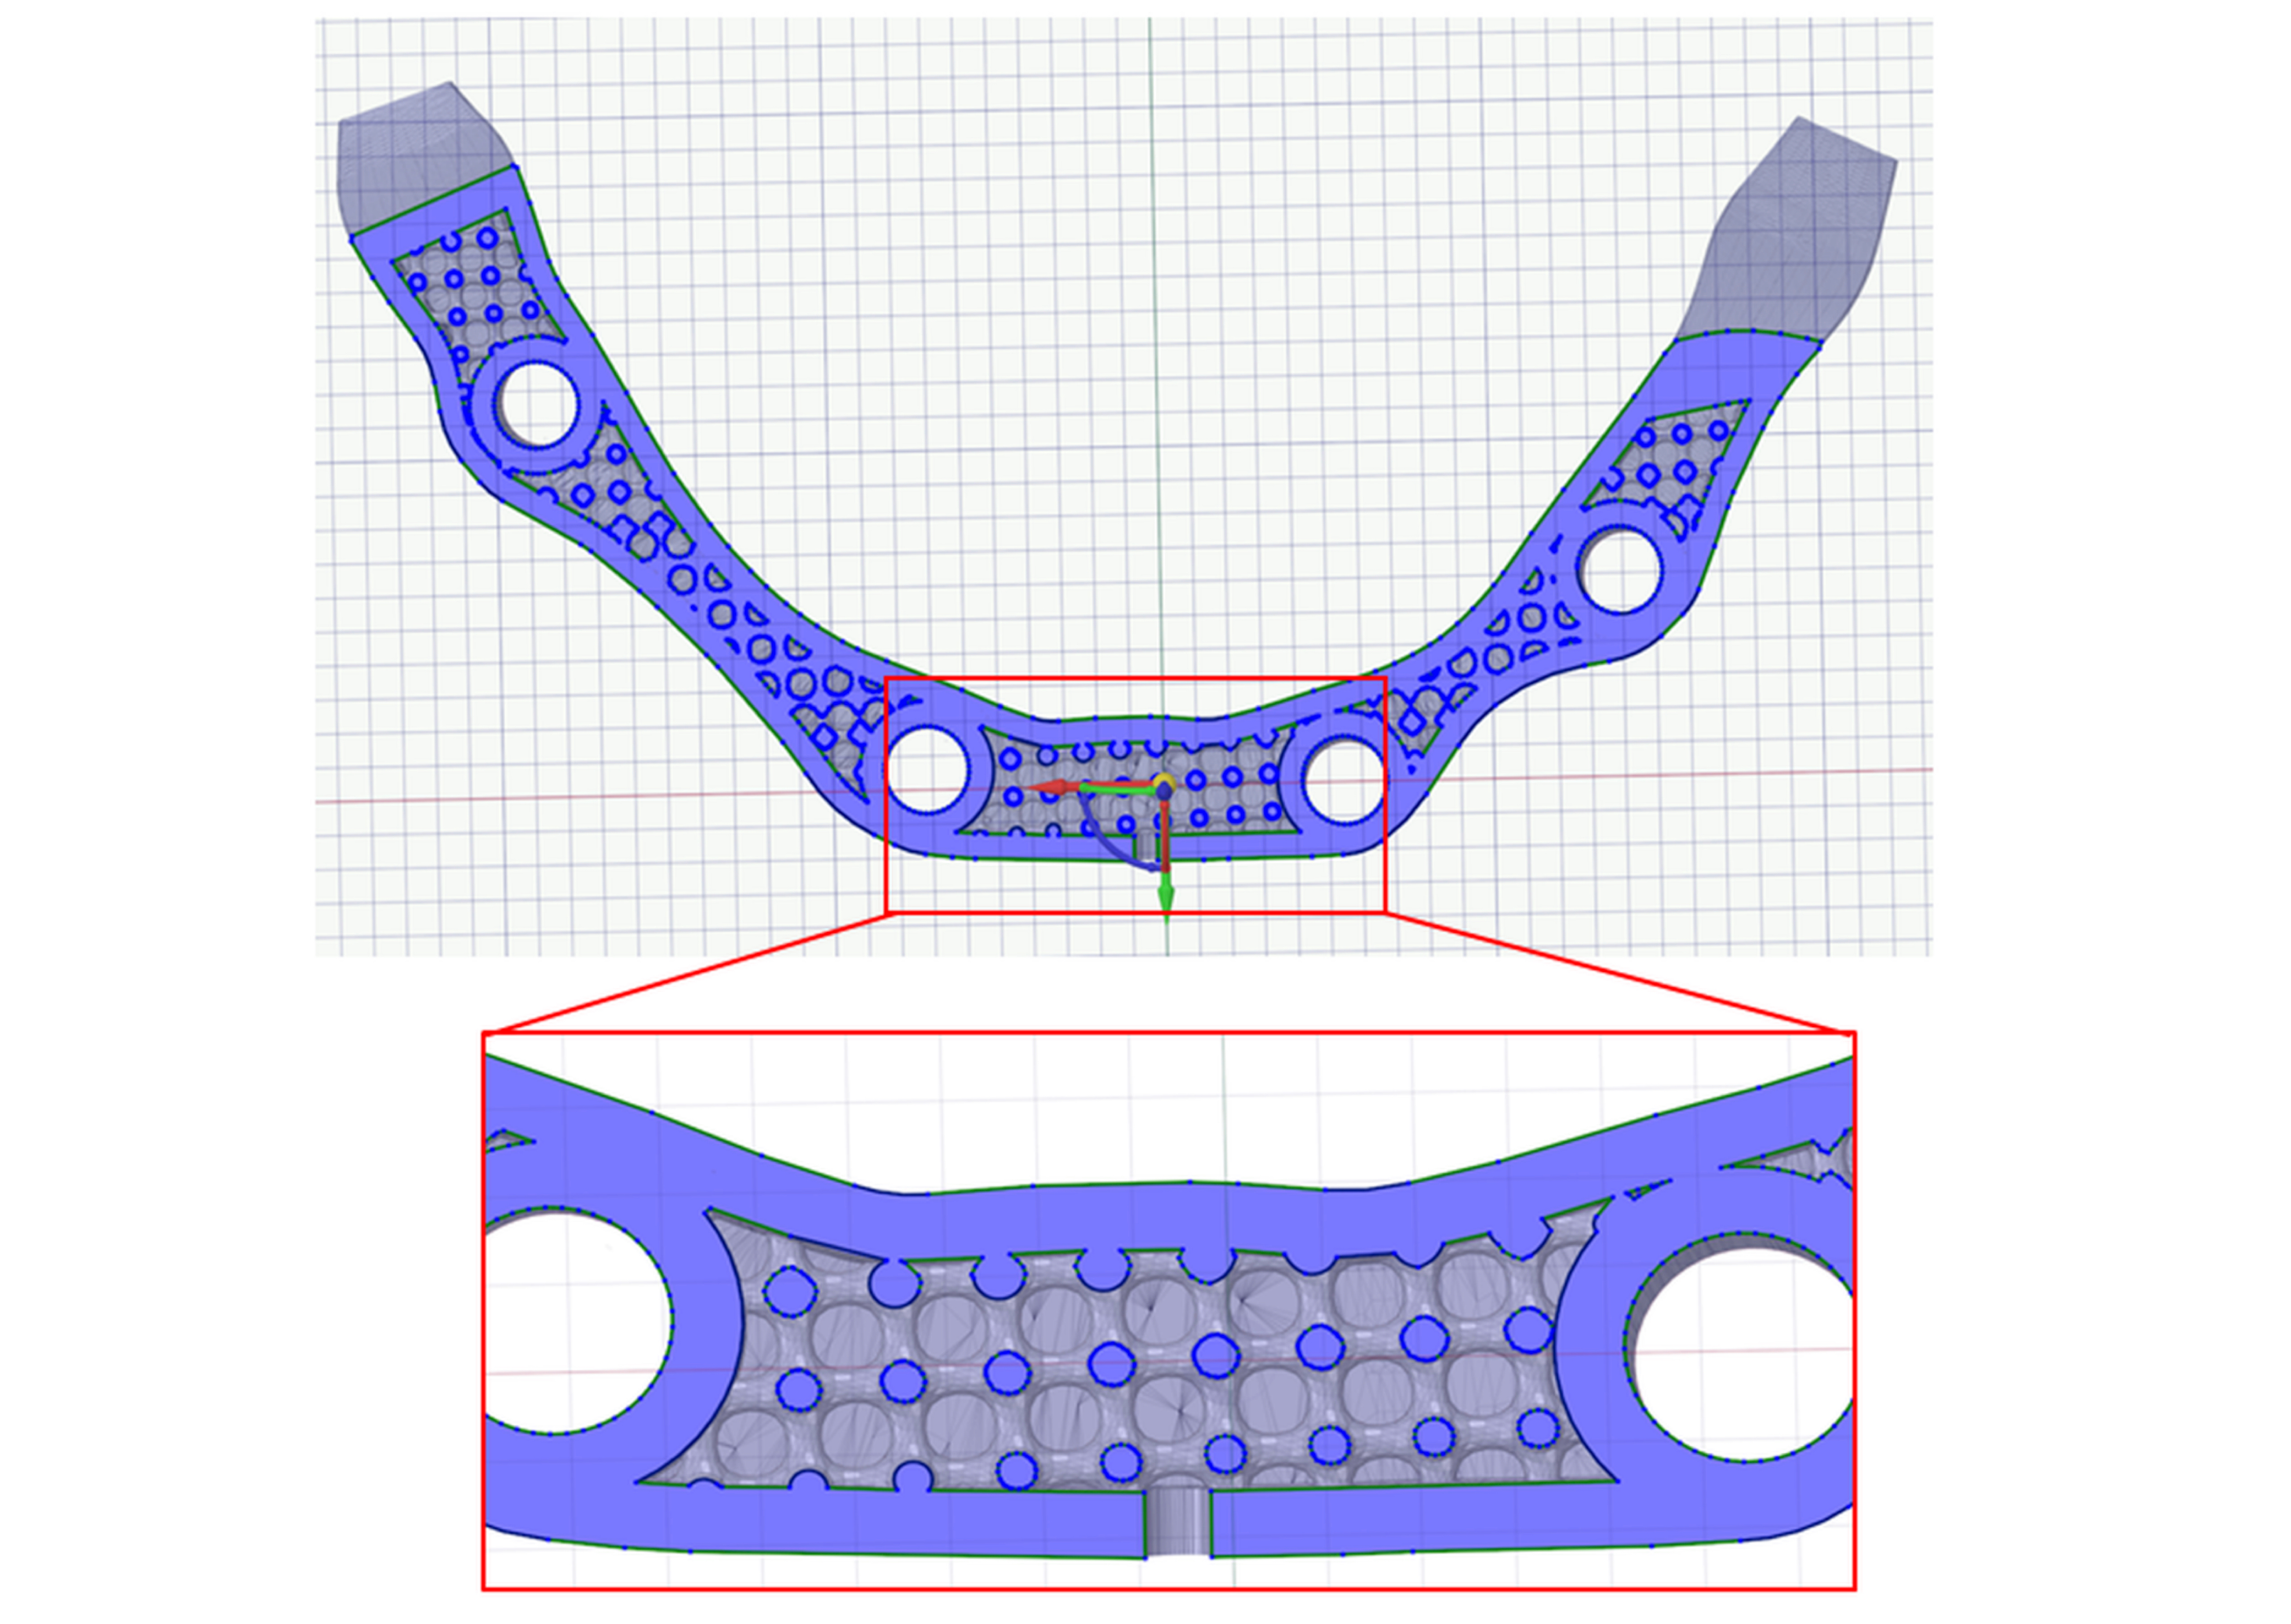 Fig. 2: Implant bar model with internal lattice pattern. (Image courtesy of © ADEISS)